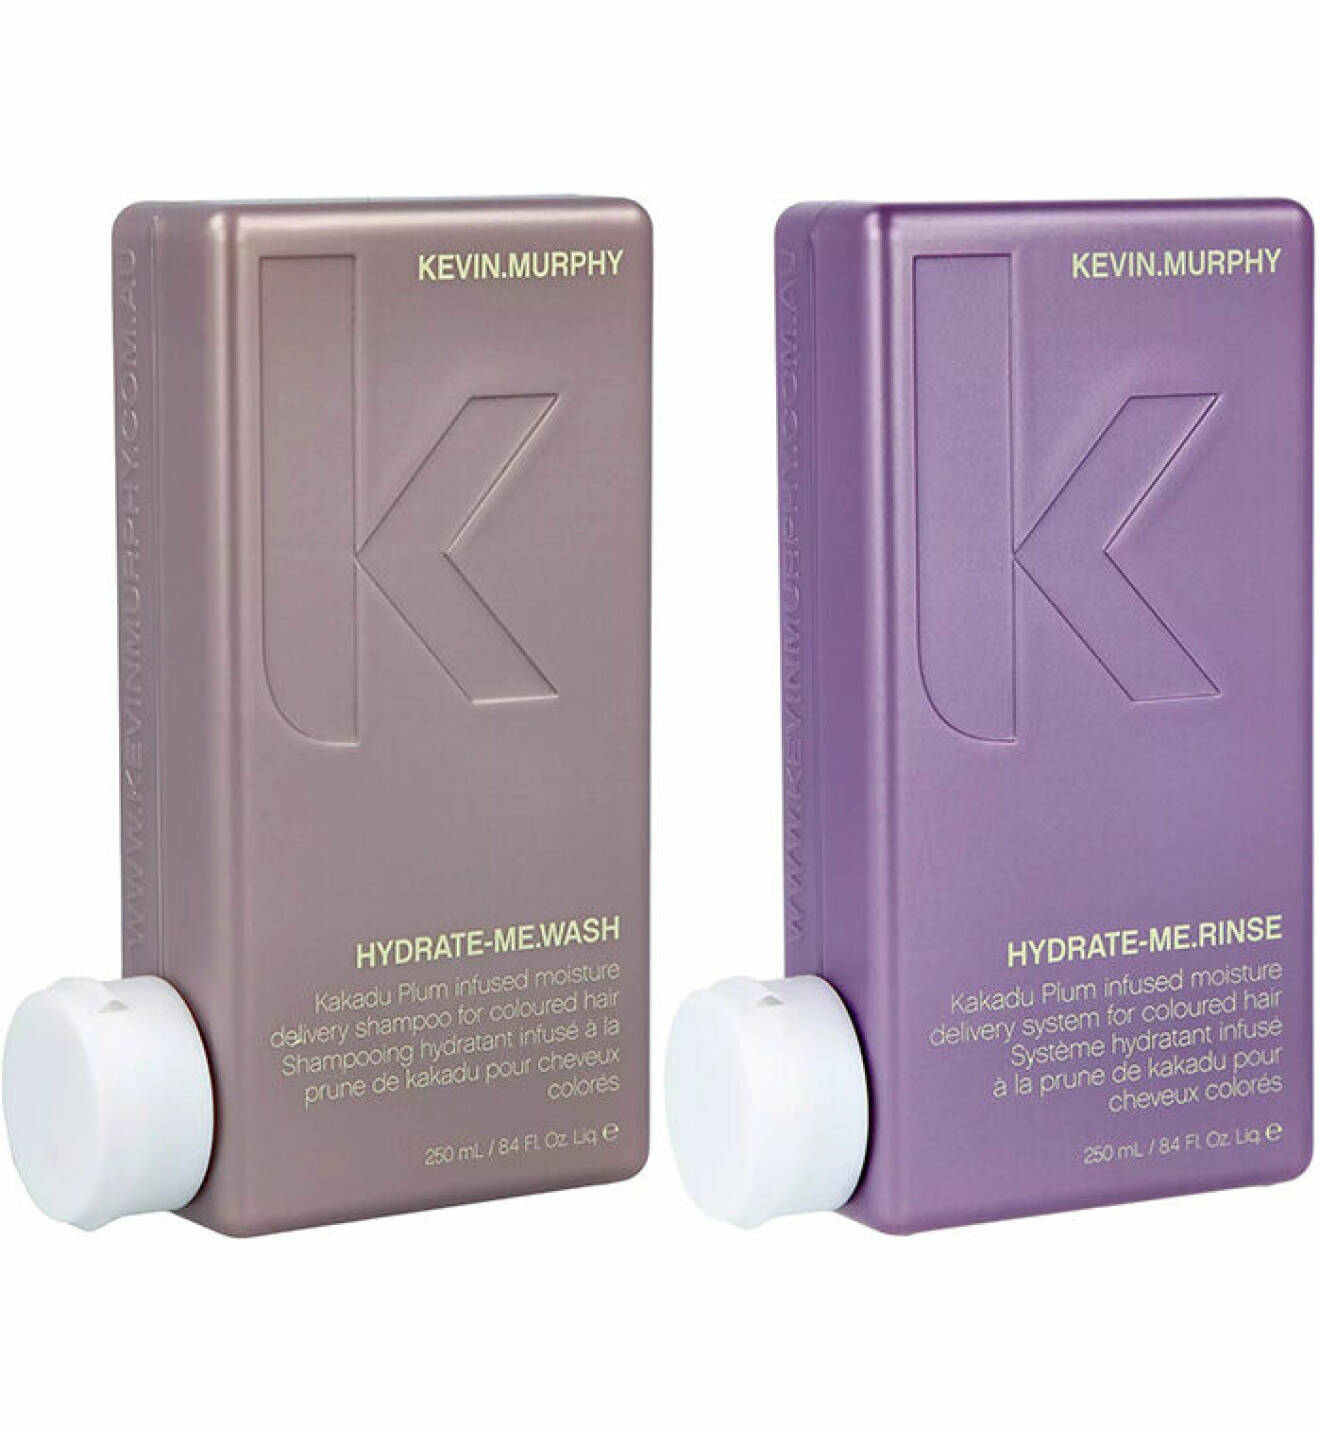 Kevin Murphy
Hydrate Me